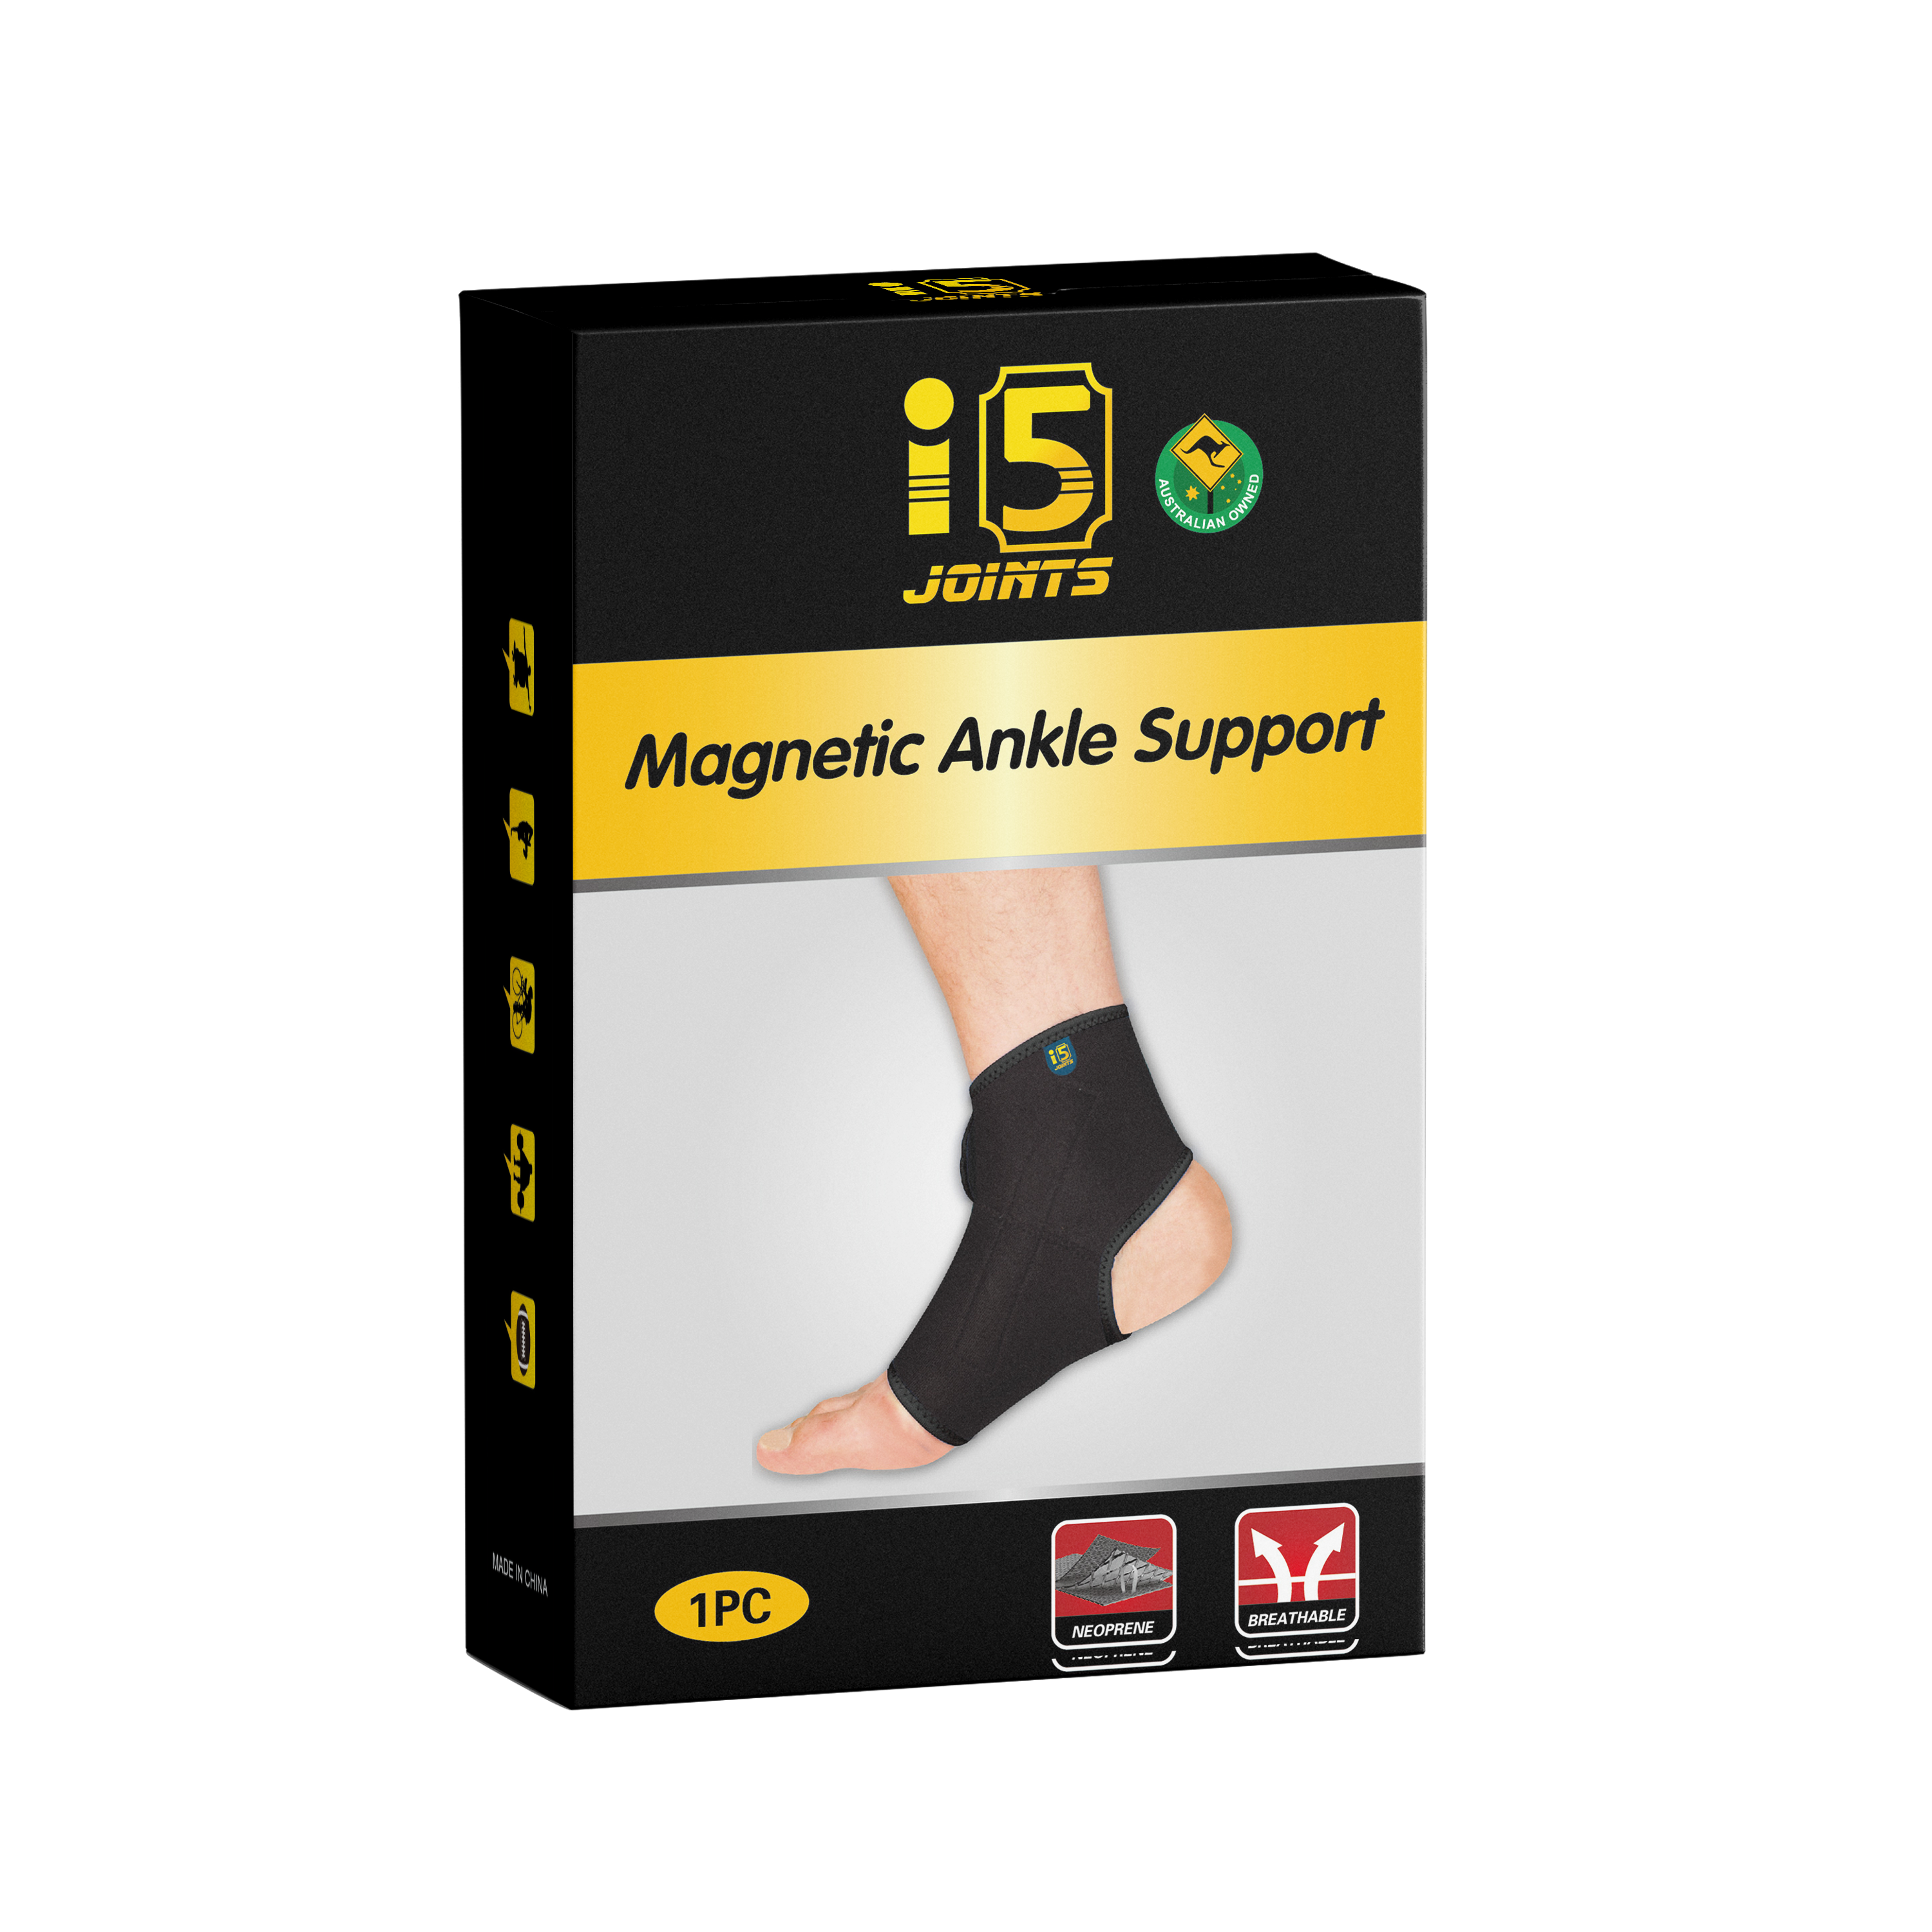 I5Joints – Magnetic Ankle Support  - Ankle Compression Brace for Injuries, Foot Care, Sprain, Injury, Swelling & Pain Relief and Recovery , Adjustable Ankle Protection Guard, Ankle Band For Men & Women (Ankle Brace Universal)